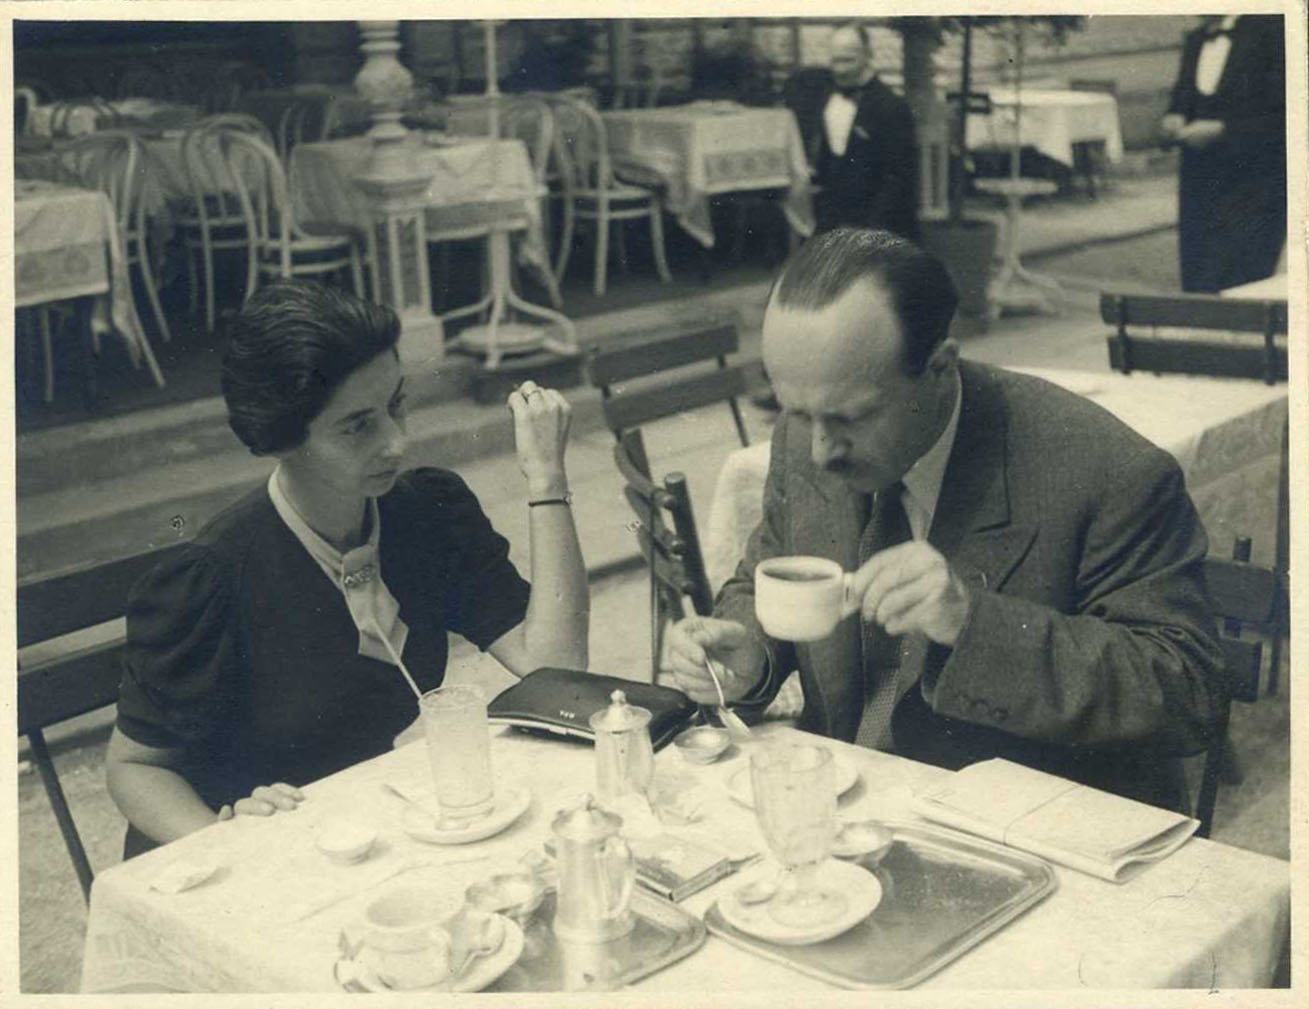 Grete and Edward Bibring at the cafe